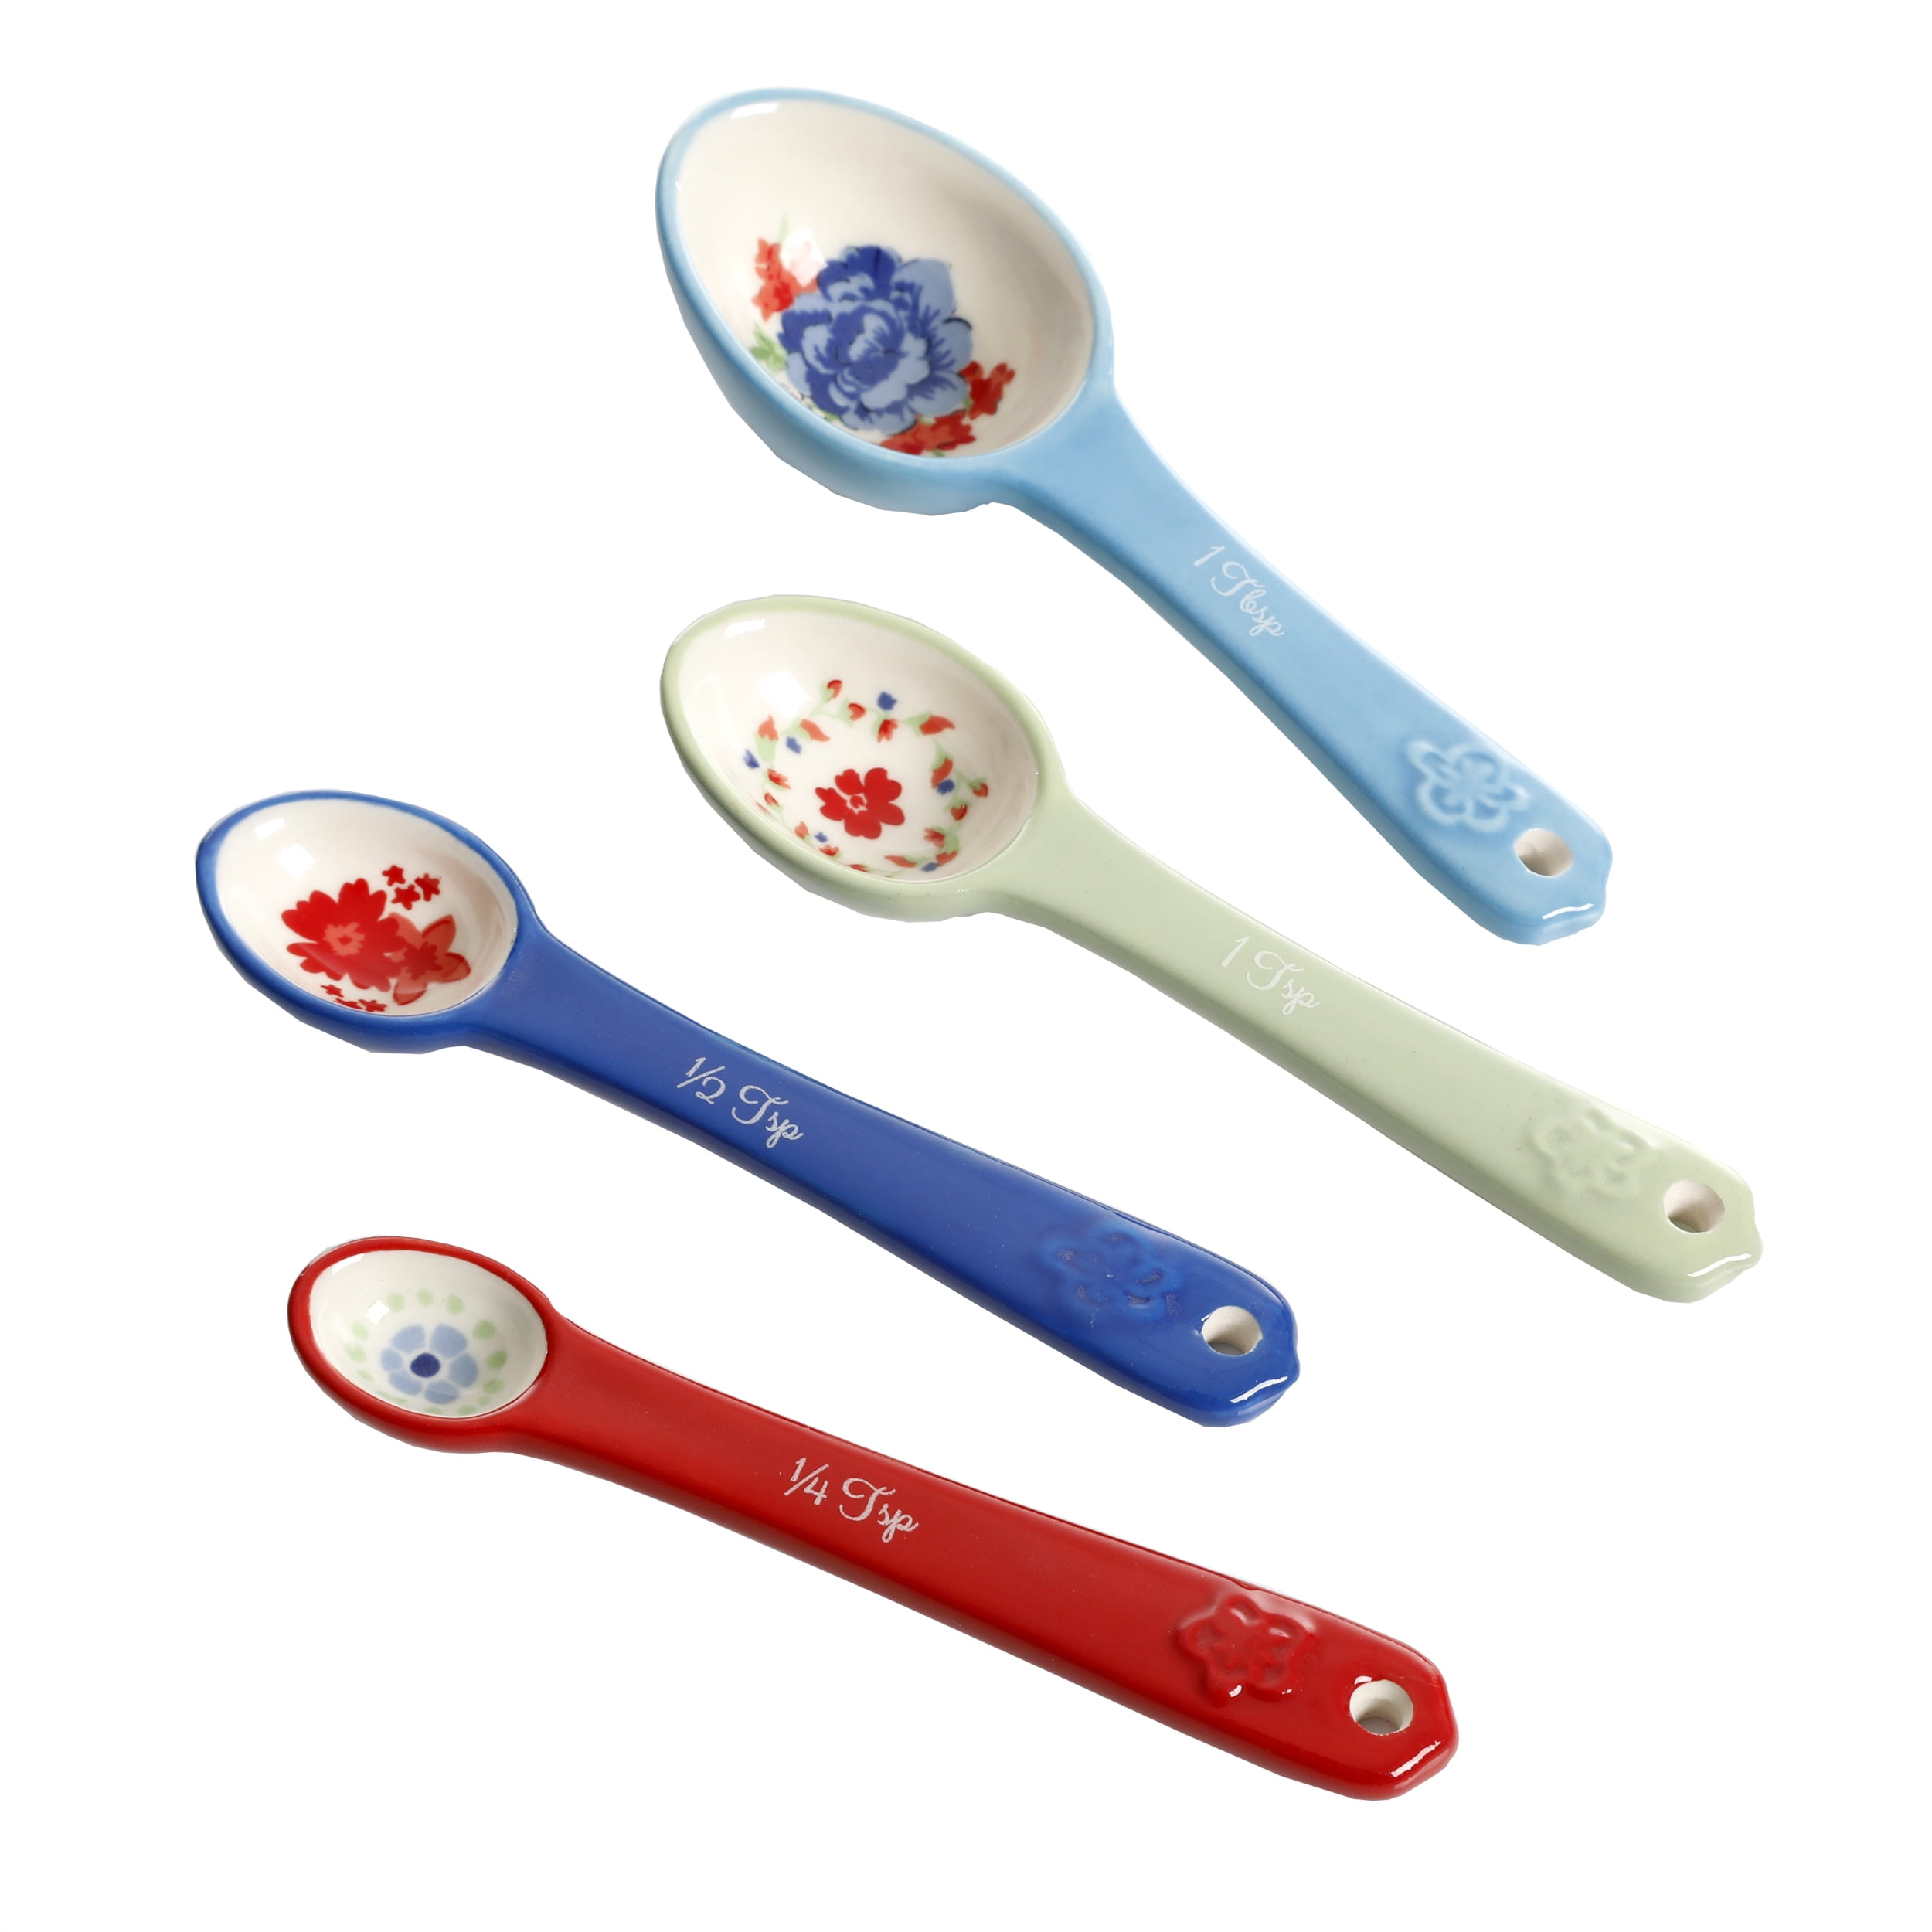 Measuring Cups, Stainless Steel Spoons, Baking Gifts, Wildflower, Gift for  Best Friend Female, 